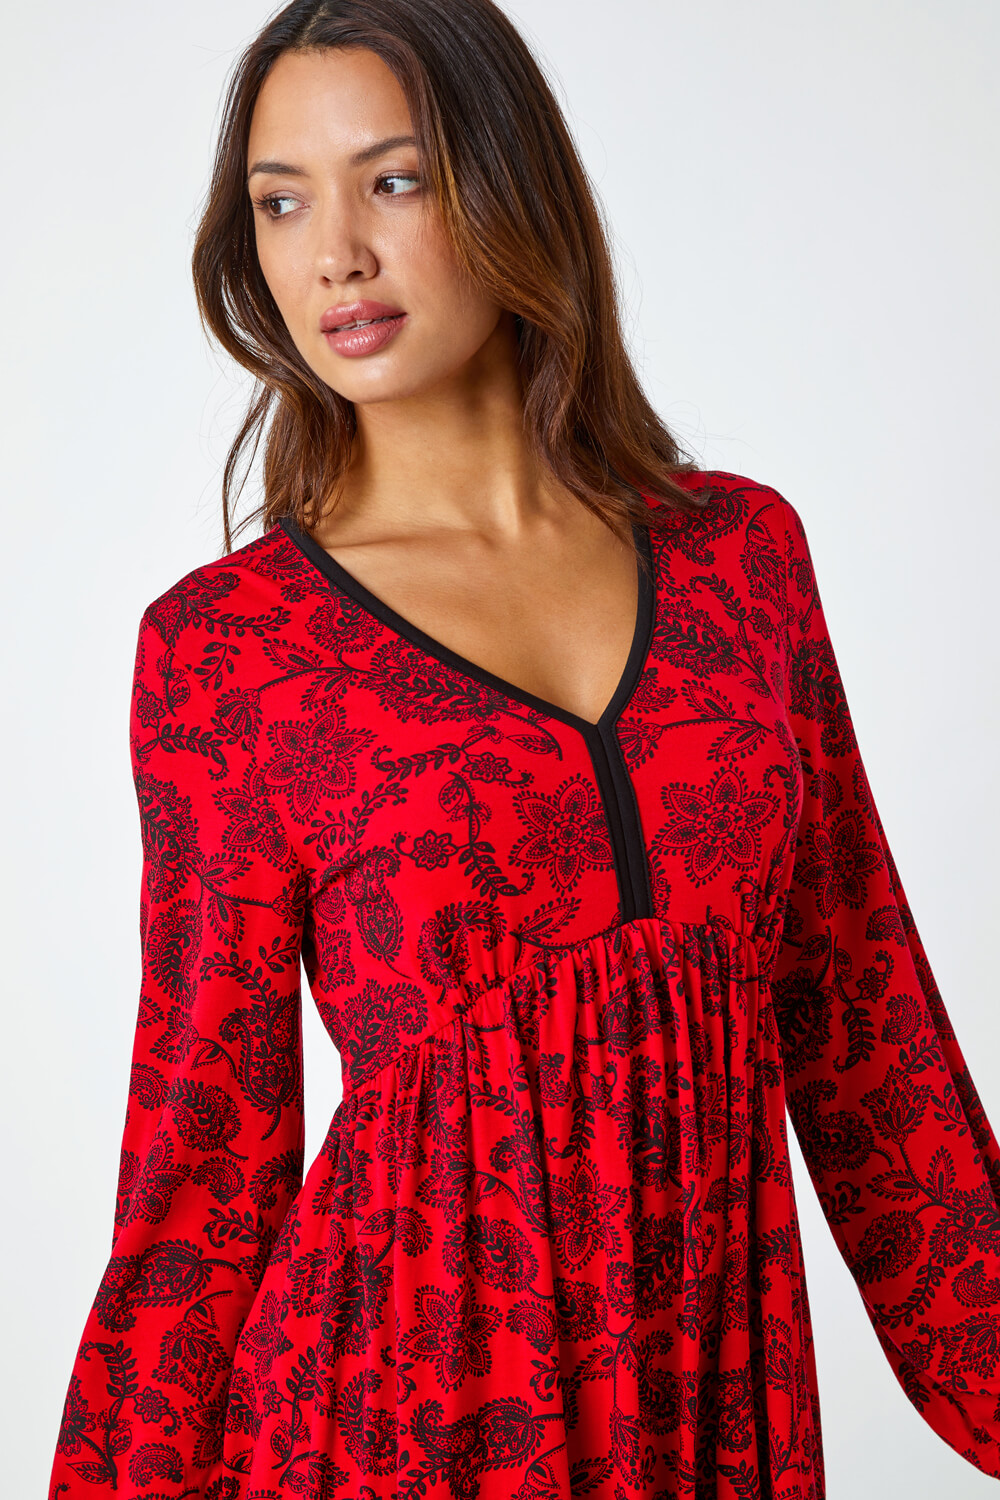 Red Floral Print Stretch Jersey Dress, Image 4 of 5